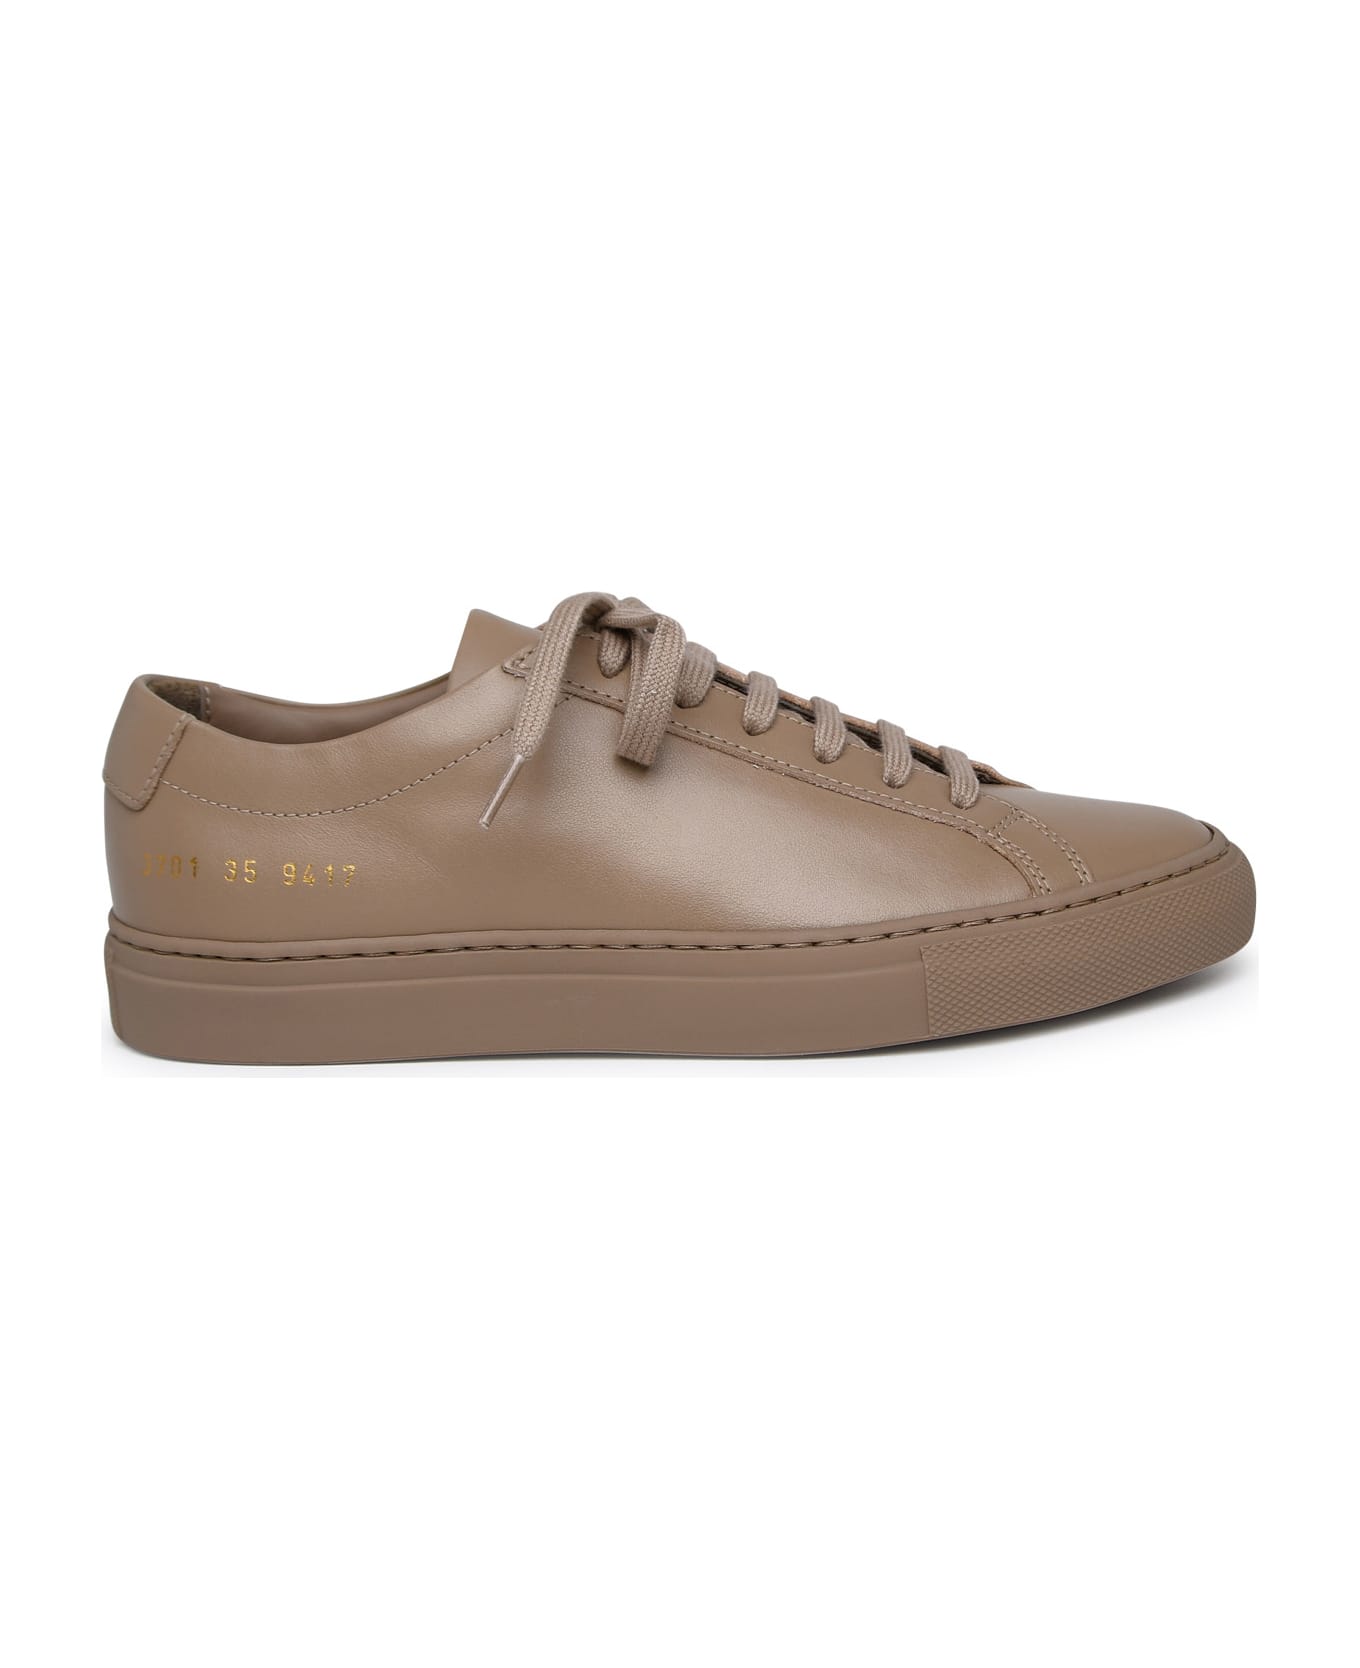 Common Projects Achilles Beige Leather Sneakers - Beige